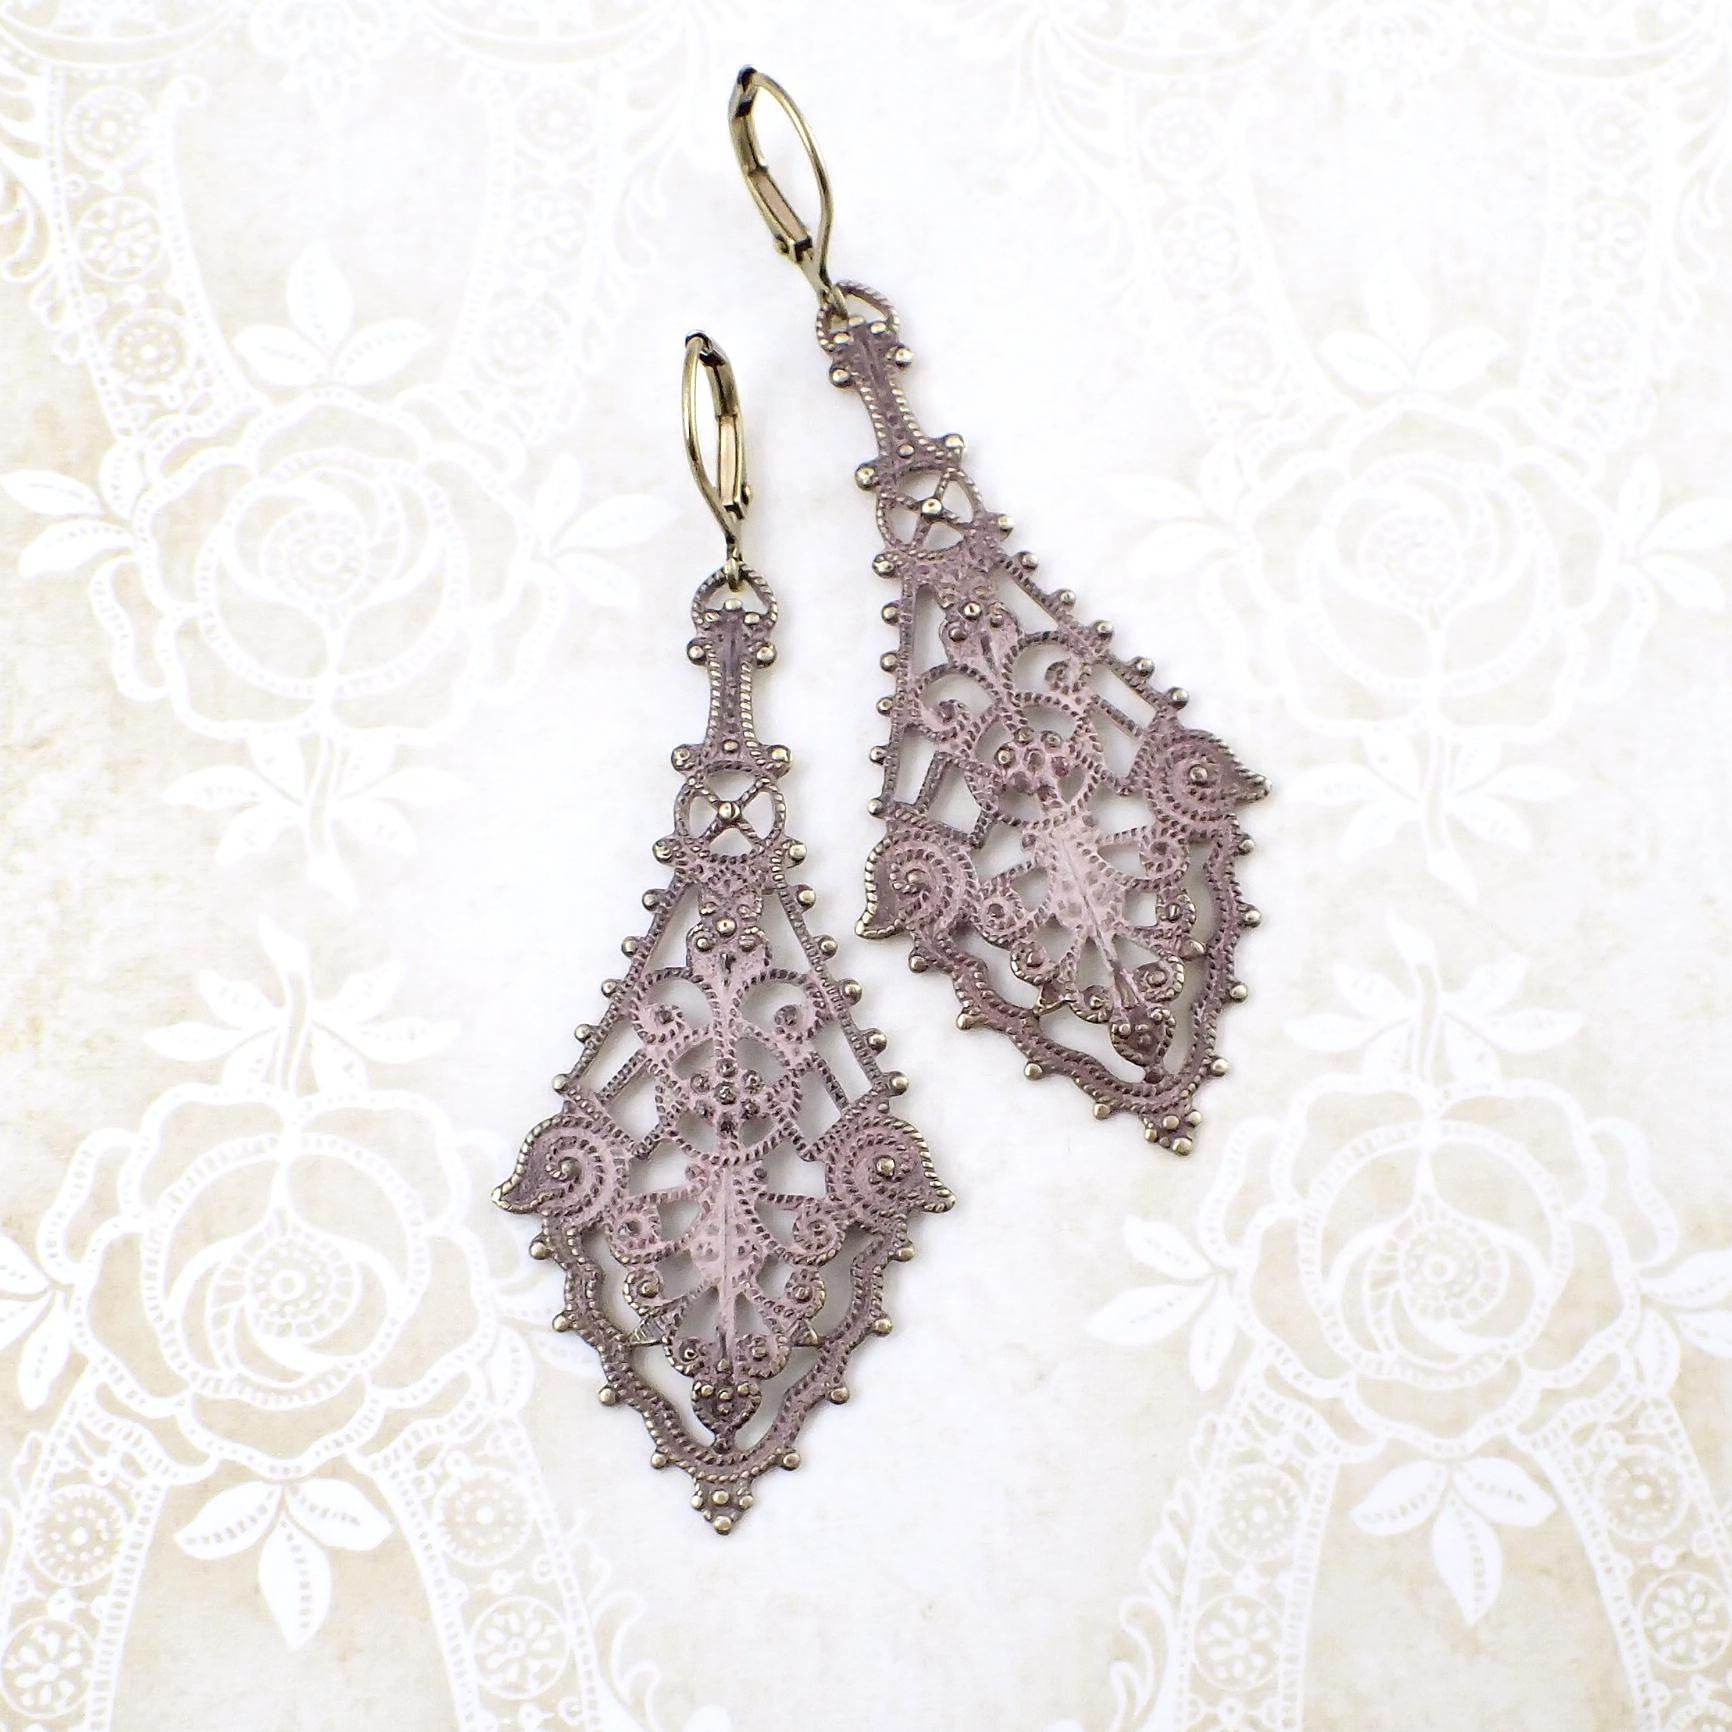 Shabby Distressed Pink Patina Filigree Earrings